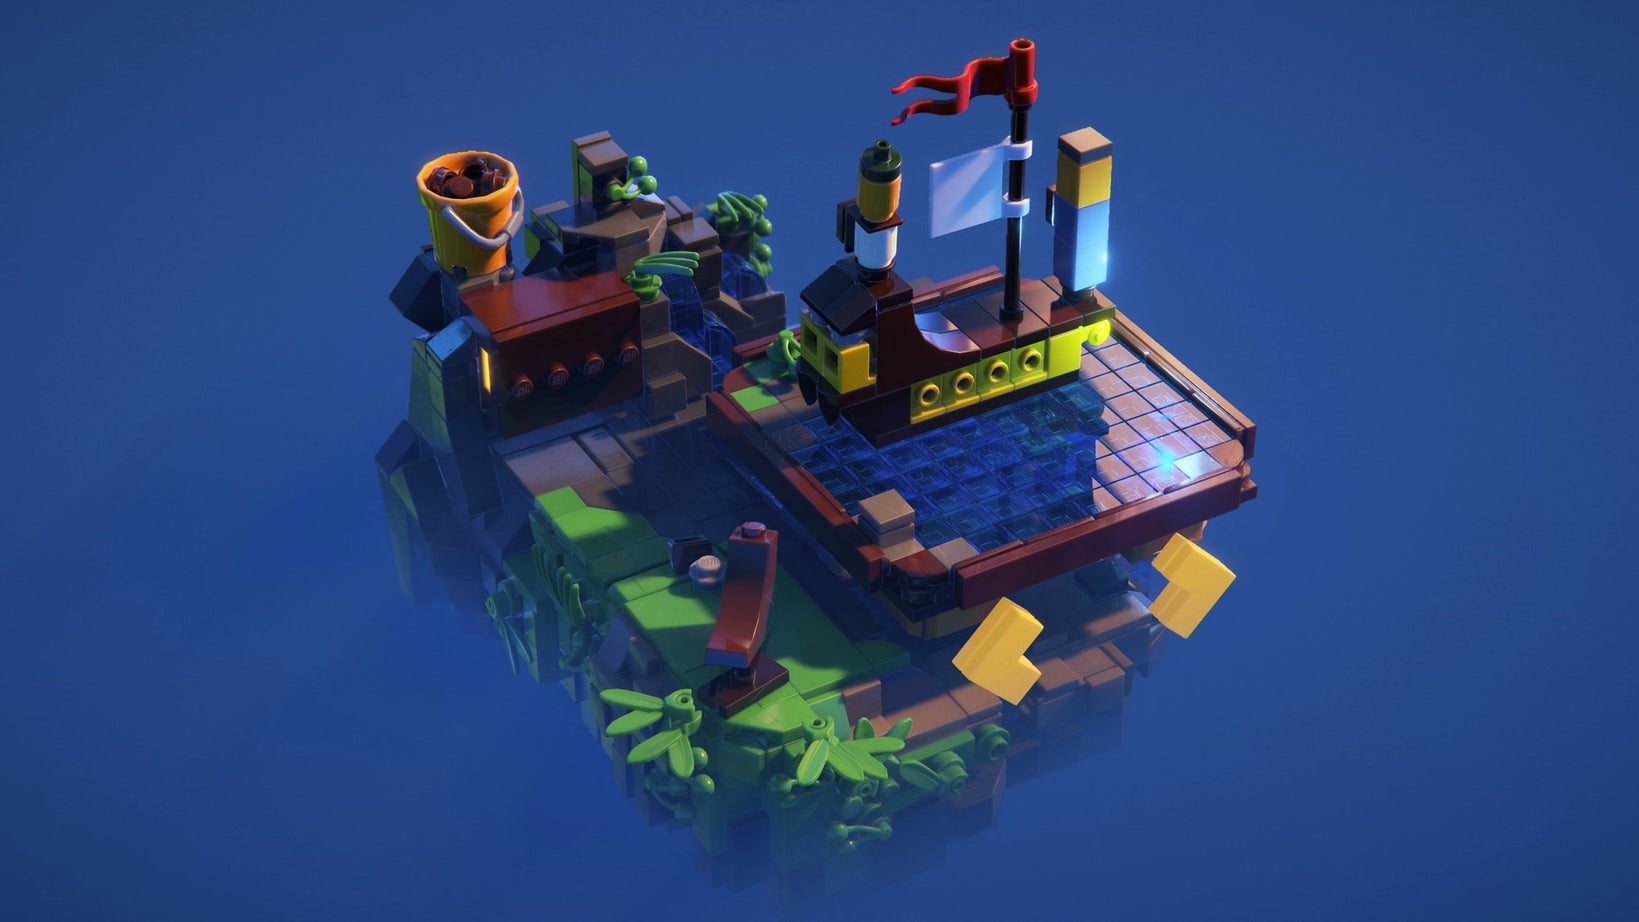 Lego Builder's is the next game from Epic Games Store | Rock Paper Shotgun